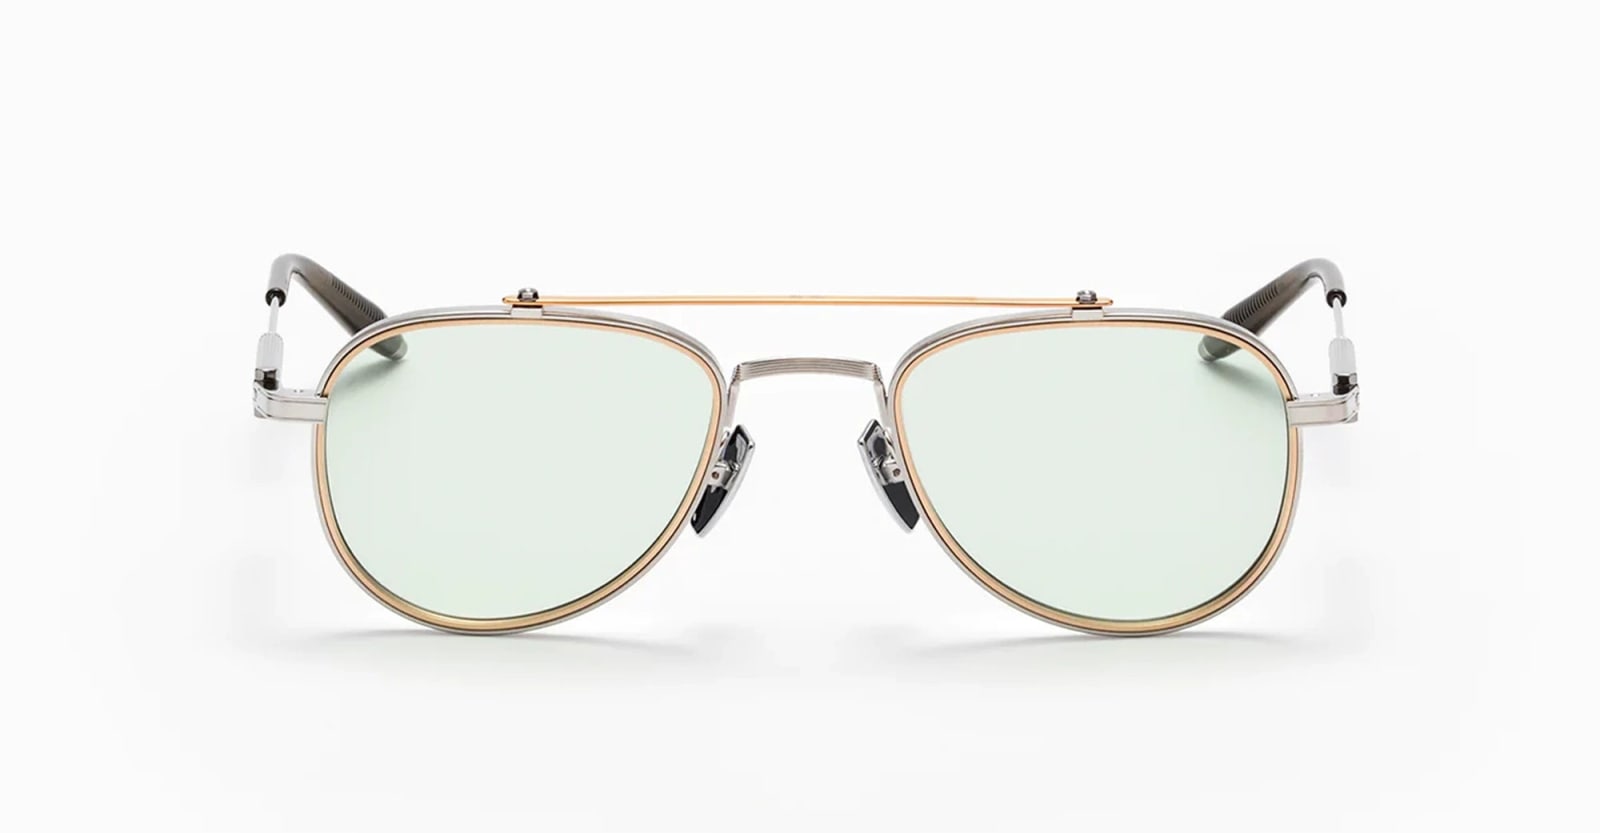 Akoni Calisto - Brushed Silver/matte Gold Brow Bar/olive Glasses